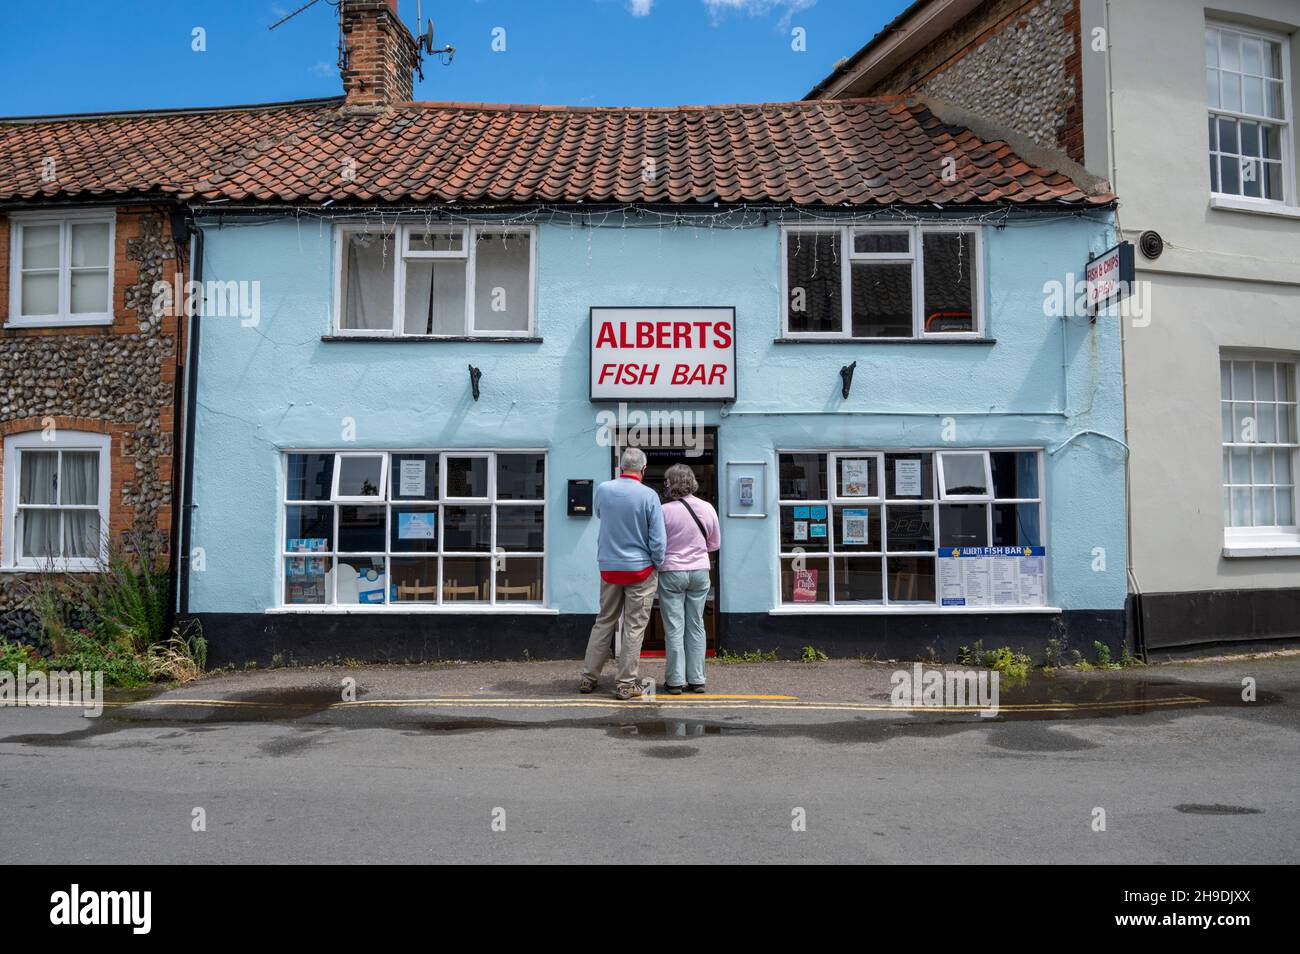 Alberts fish bar, a fish and chip shop in Holt Norfolk UK Stock Photo